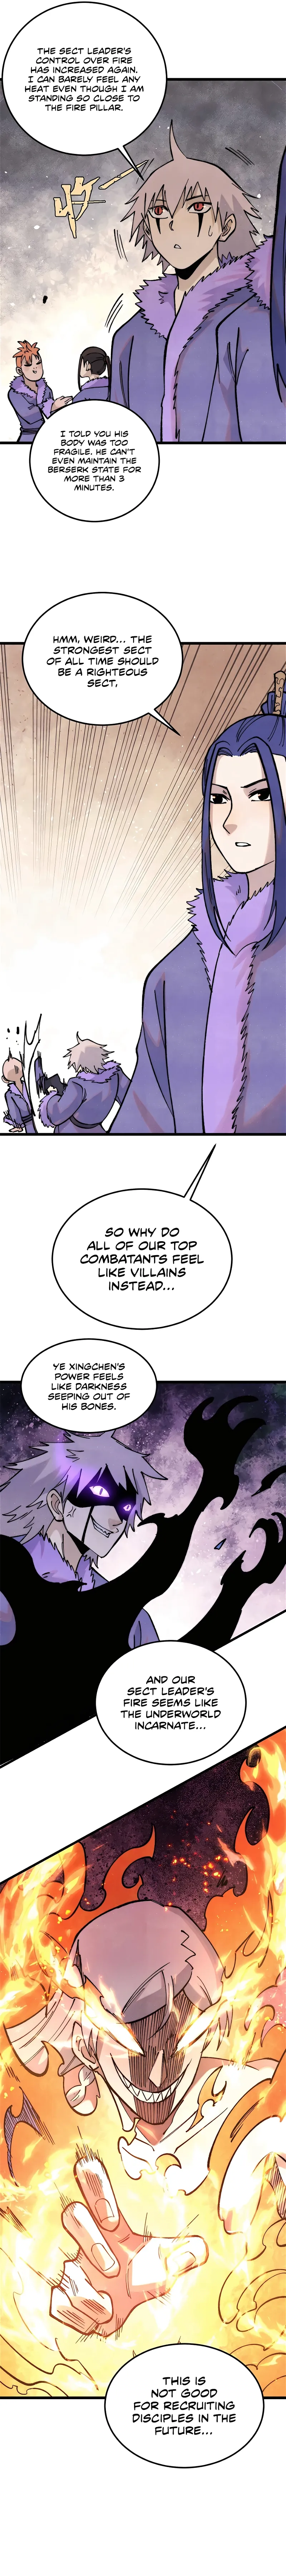 All Hail The Sect Leader Chapter 313 page 6